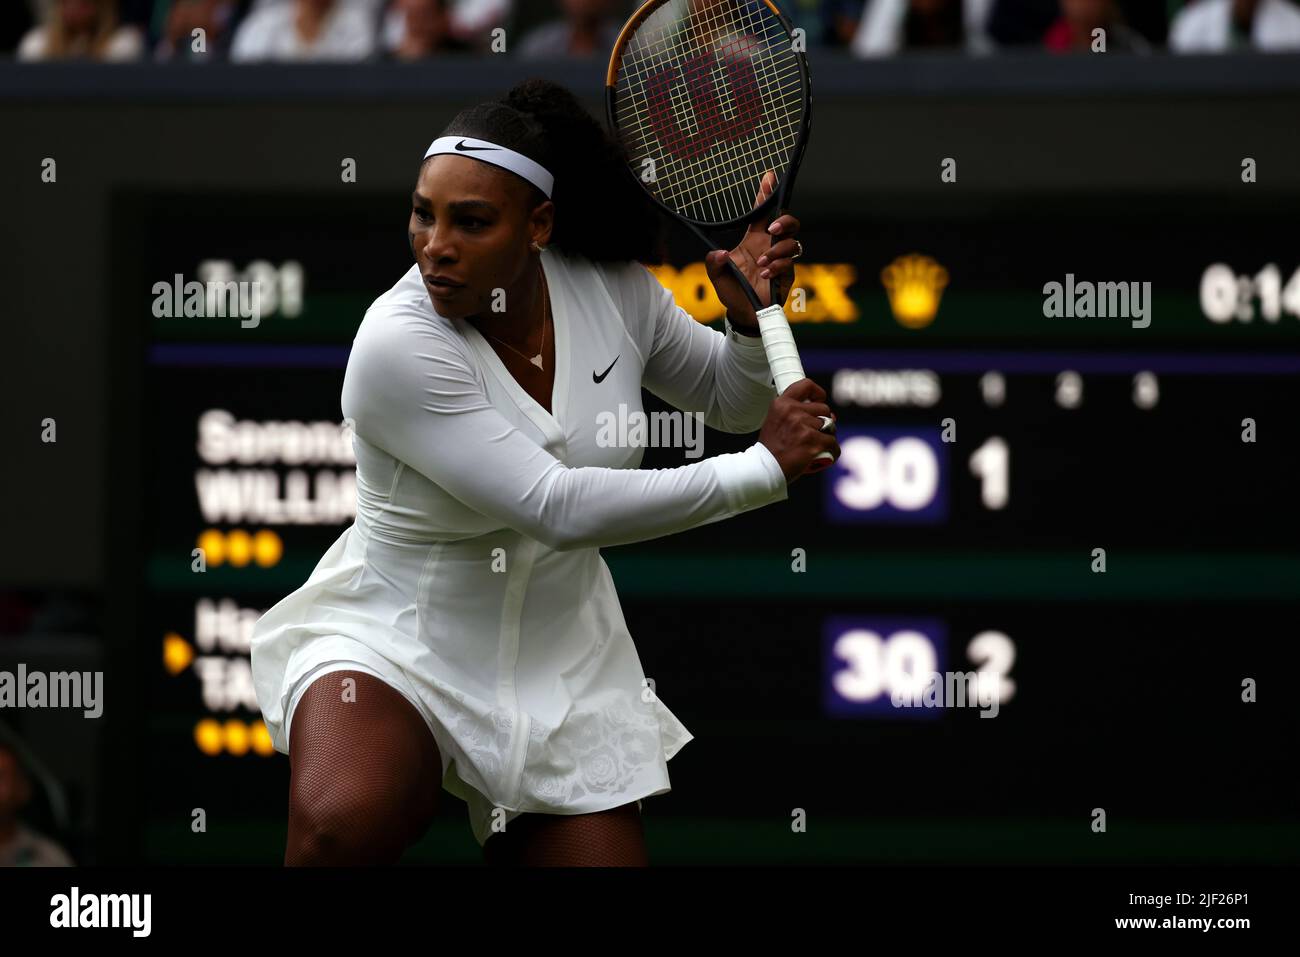 London, 28 June 2022 - London, 28 June 2022 - Serena Williams during her first round loss to Harmony Tan of France on Centre Court at Wimbledon today. Credit: Adam Stoltman/Alamy Live News Stock Photo